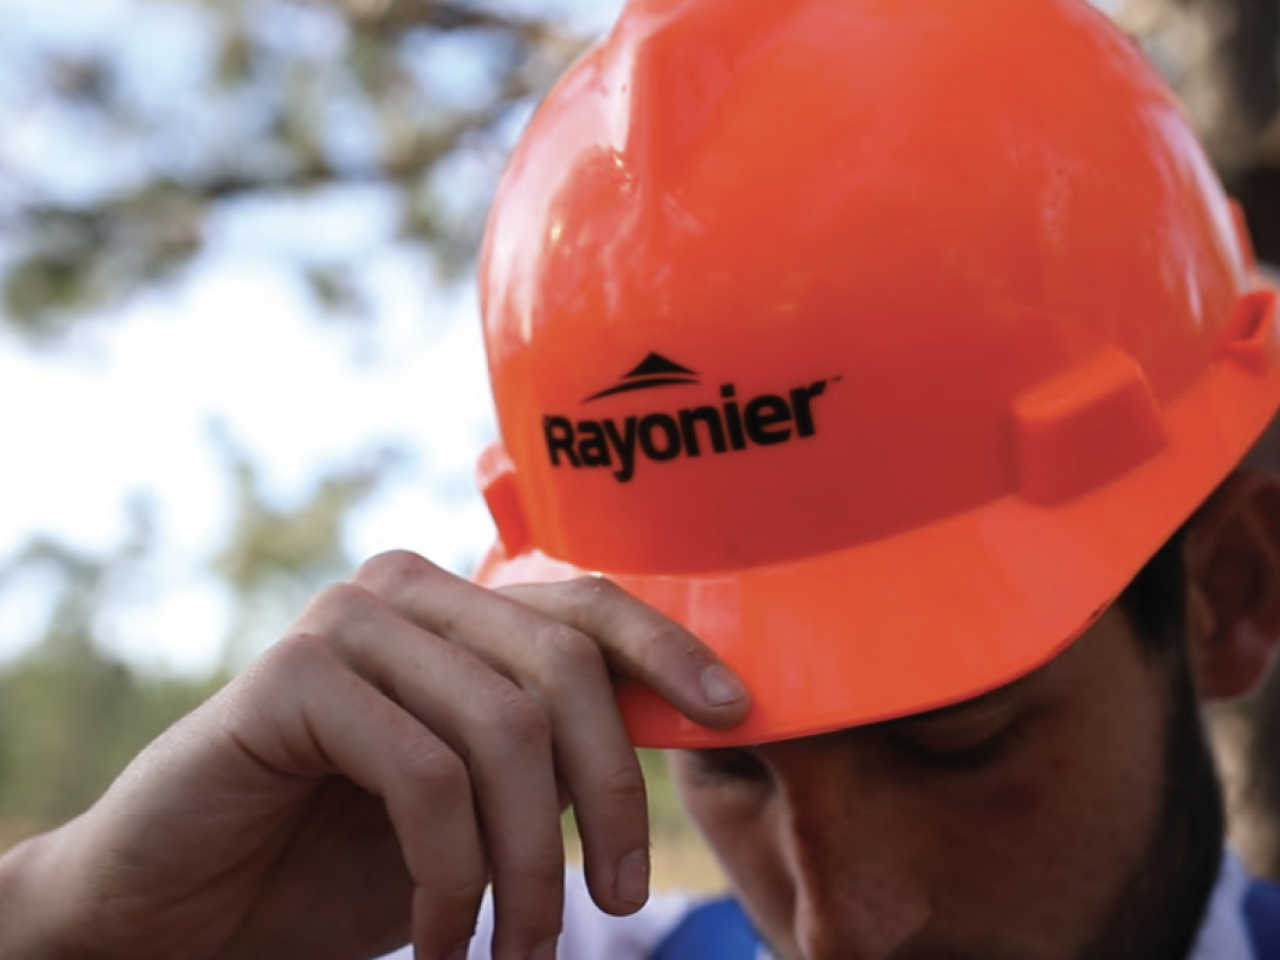 A person putting on a red safety hat with the Rayonier logo on the front